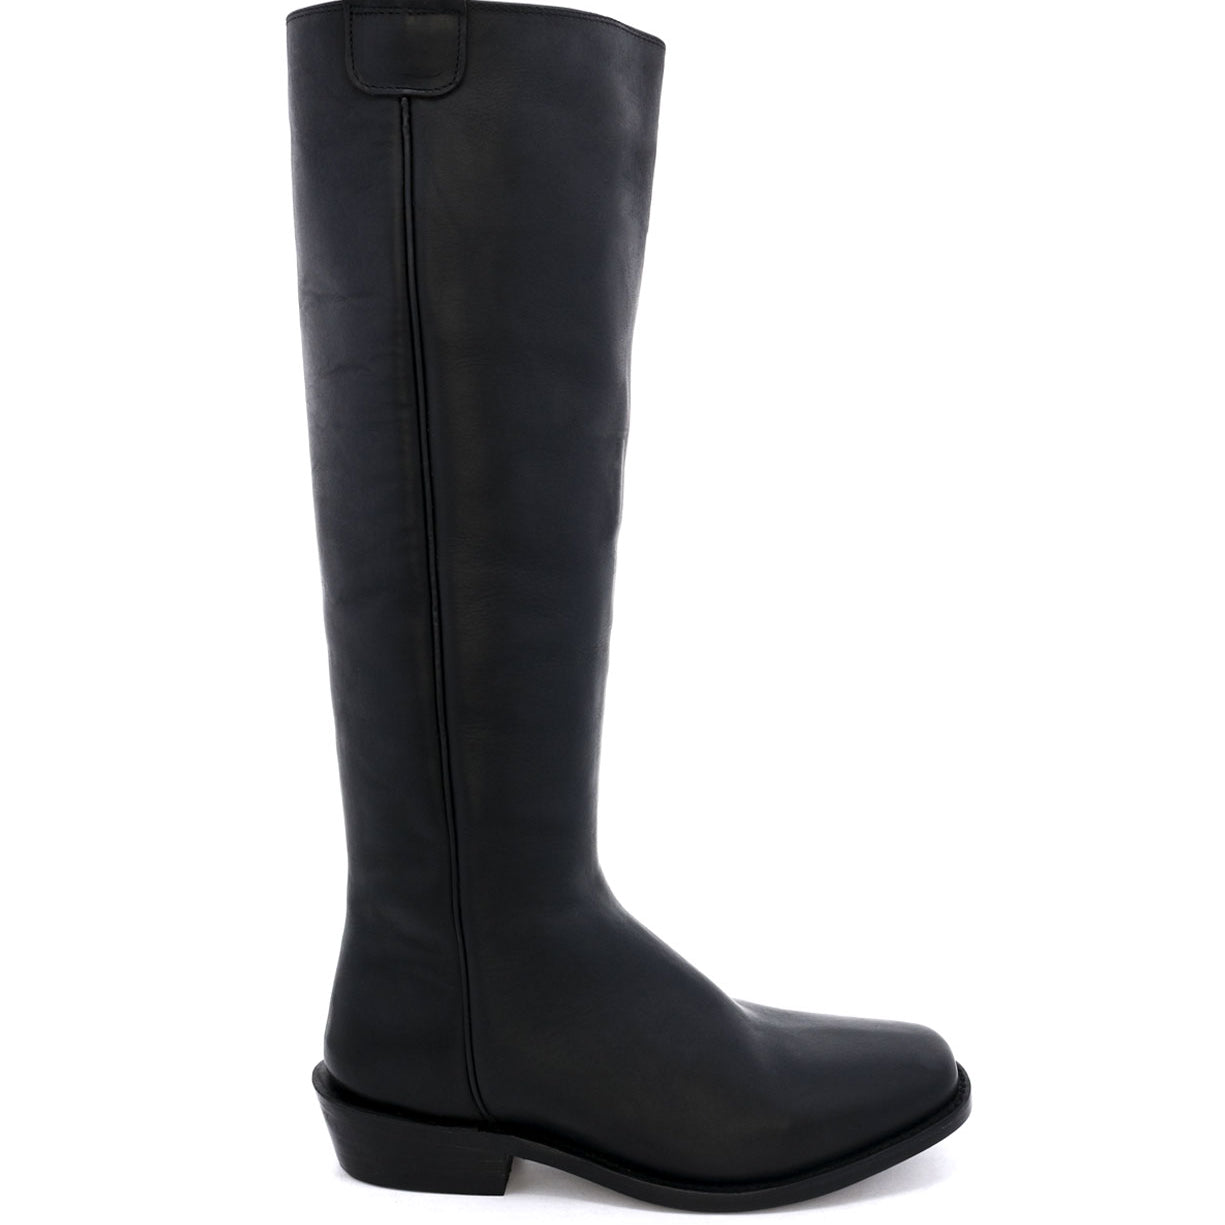 A women's Pale Rider black leather riding boot by Oak Tree Farms on a white background.